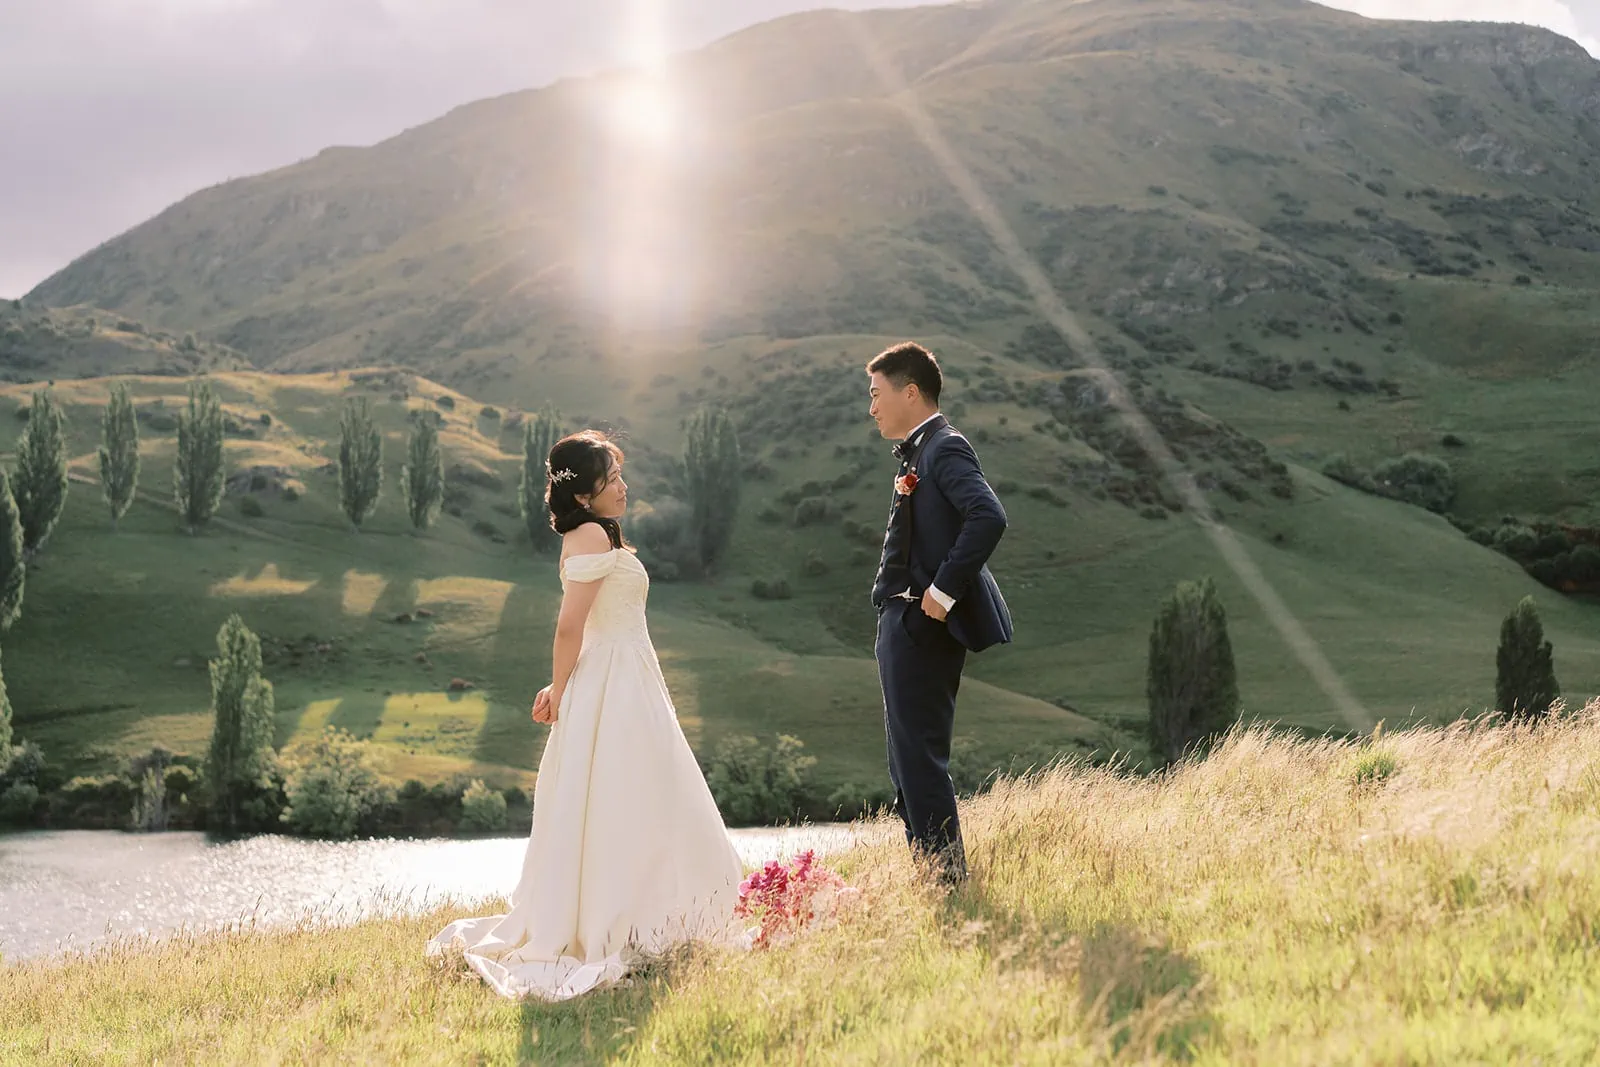 Queenstown Elopement Heli Wedding Photographer クイーンズタウン結婚式 | A bride and groom having a pre-wedding photoshoot on a hill overlooking a lake.